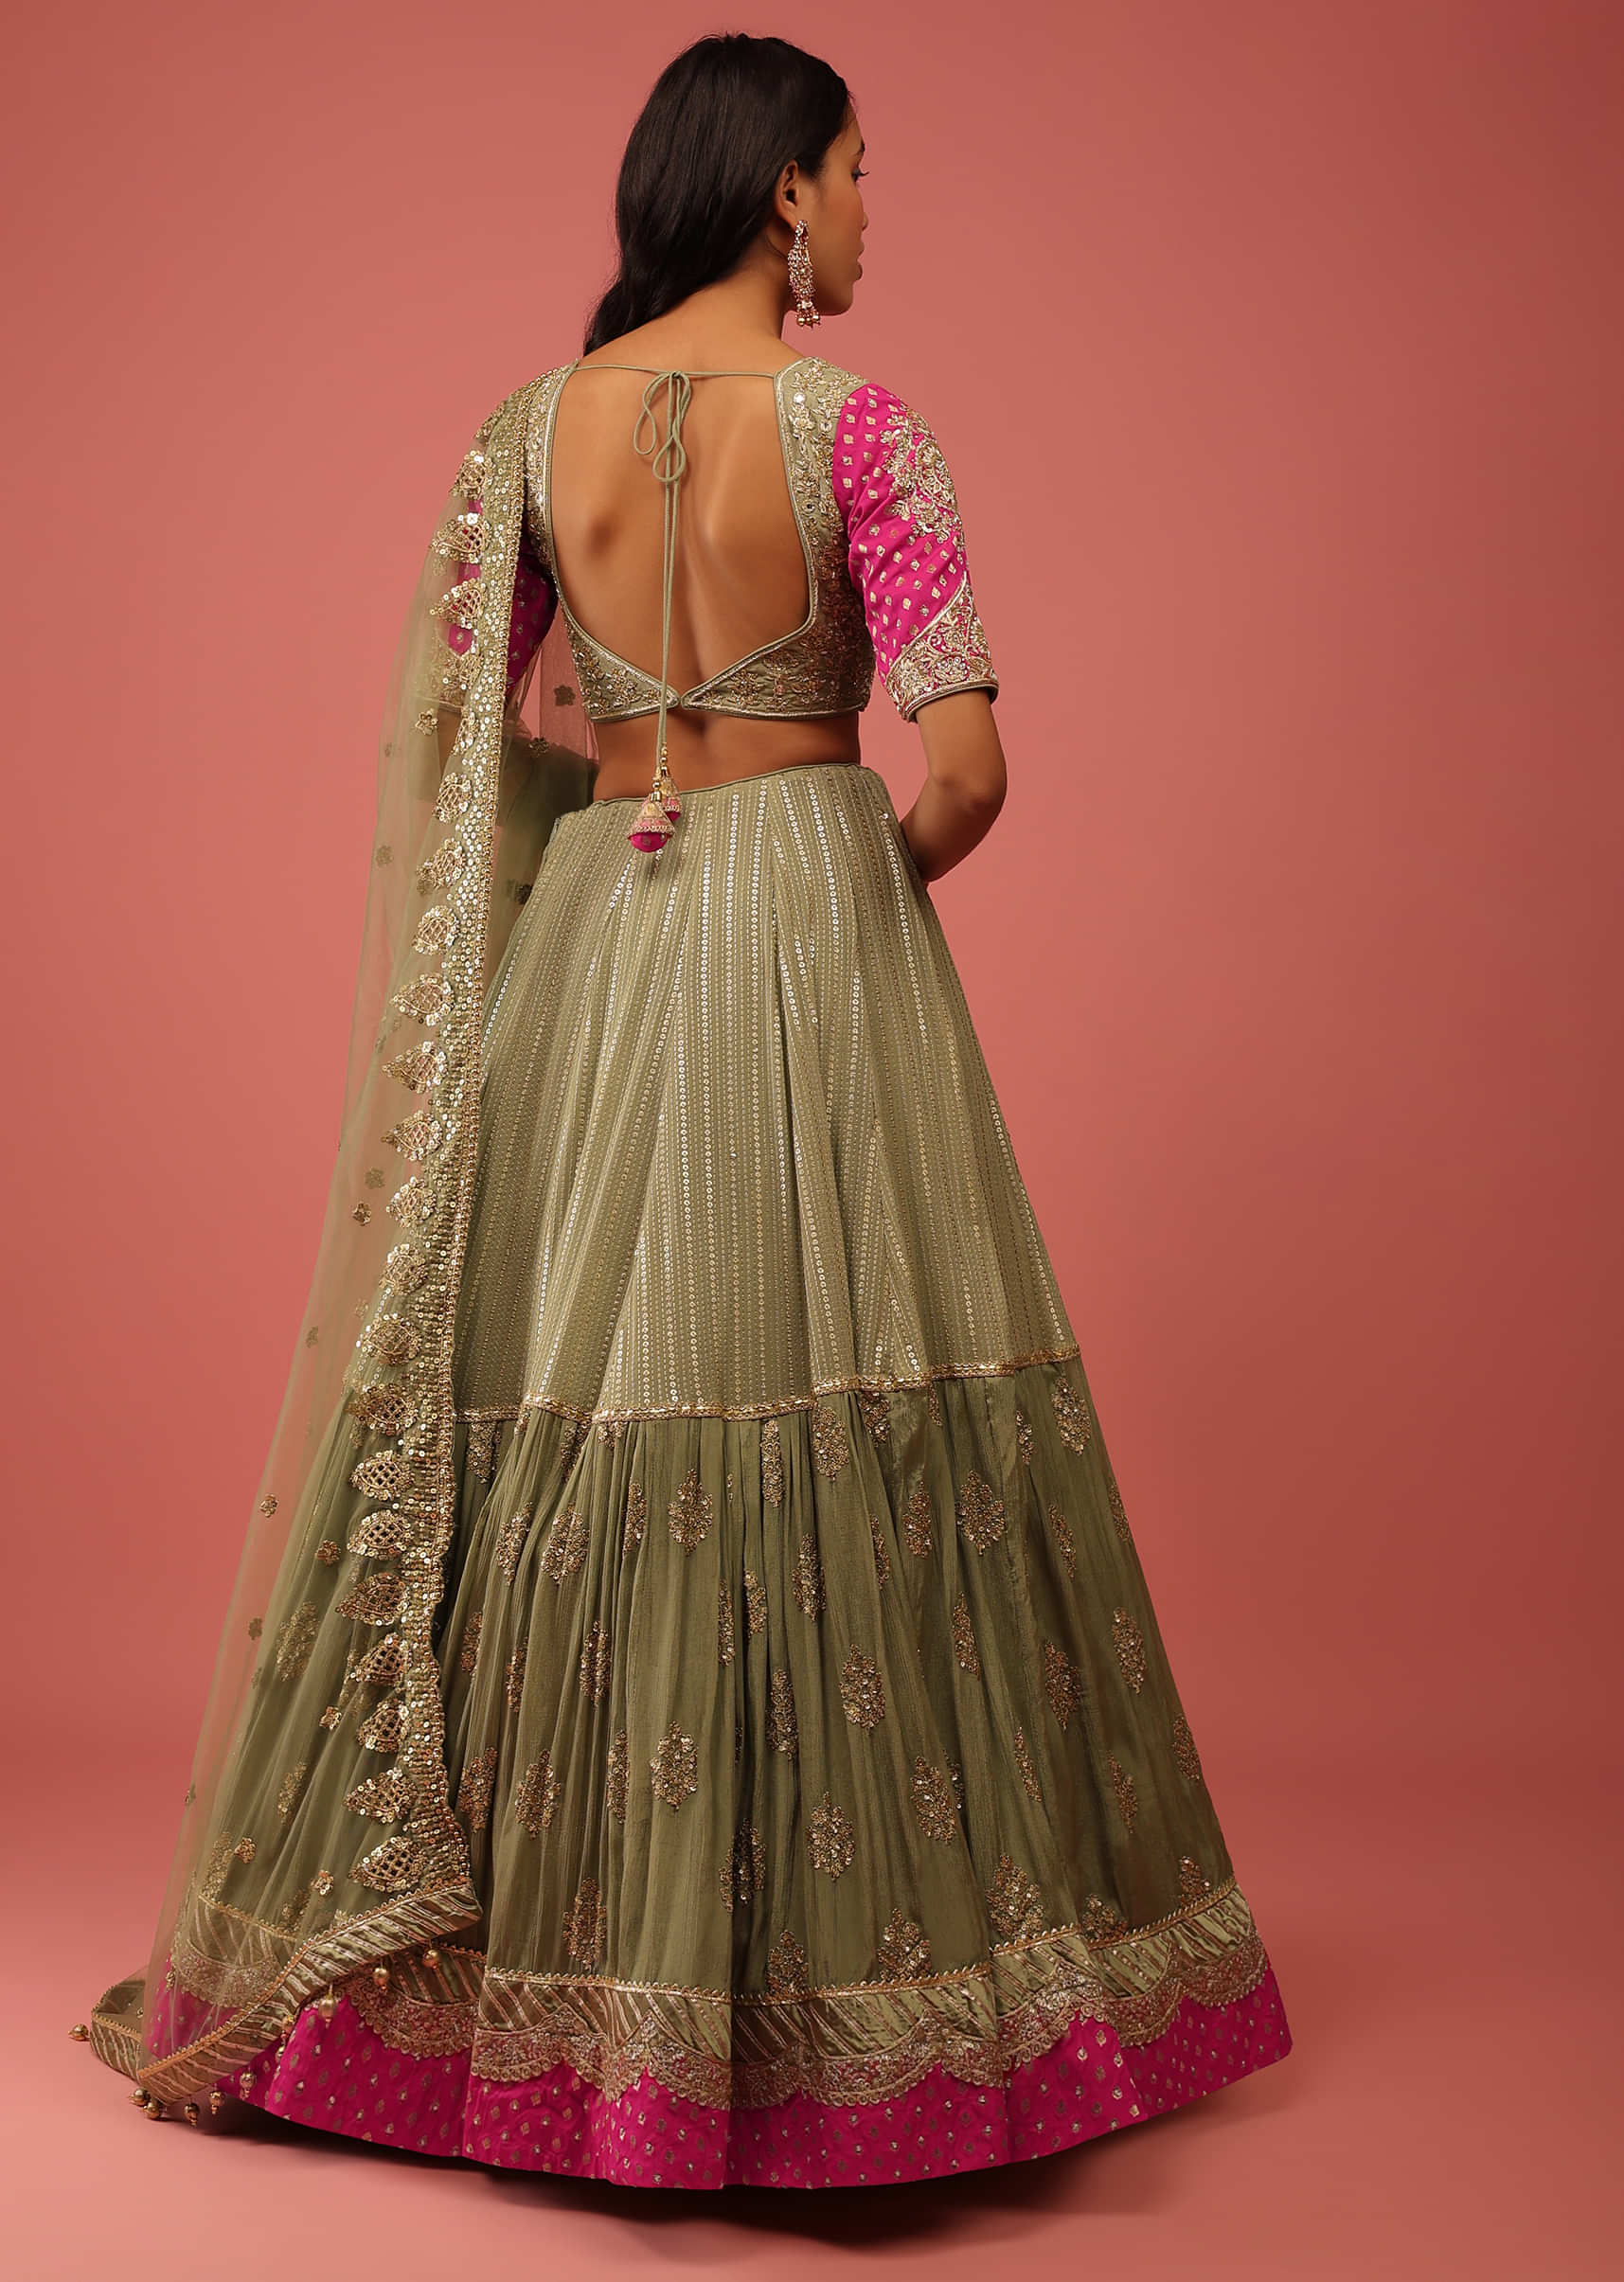 Moss Green Lehenga Choli With Sequins Embroidery And Contrasting Magenta Border And Sleeve Detailing